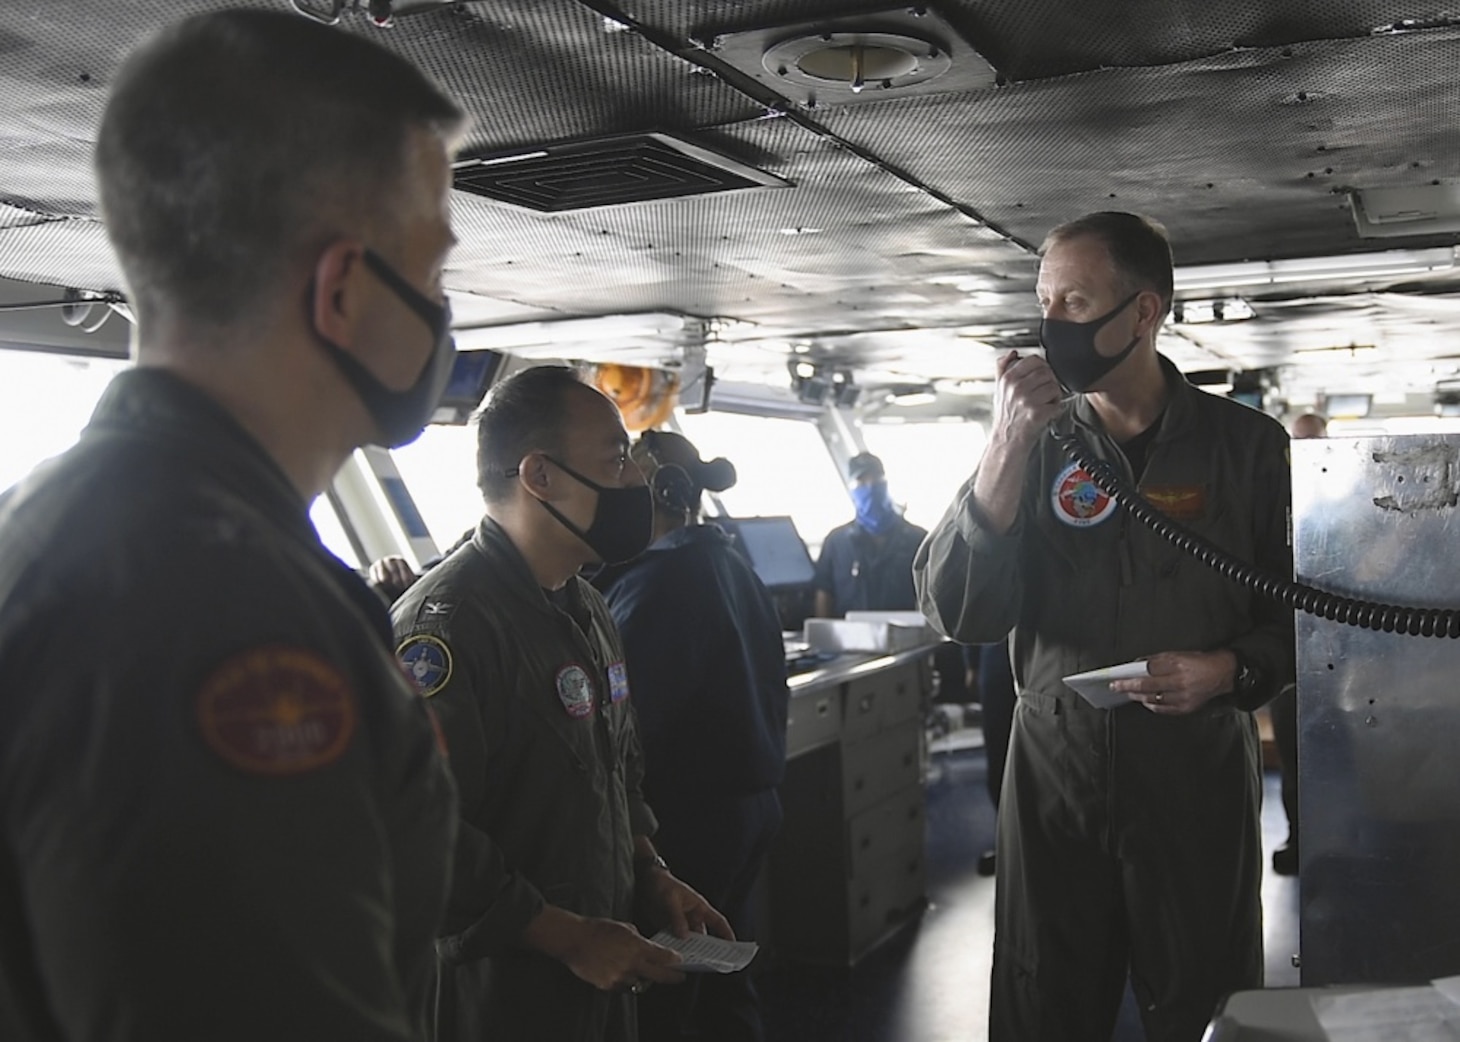 PHILIPPINE SEA (Oct. 1, 2020) Rear Adm. George Wikoff commander, Task Force 70, right, speaks at a change-of-command ceremony in the pilot house of the Navy’s only forward-deployed aircraft carrier USS Ronald Reagan (CVN 76). Following Wikoff’s remarks, Capt. Fred Goldhammer relieved Capt. Pat Hannifin as the commanding officer of Ronald Reagan. Ronald Reagan, the flagship of Carrier Strike Group 5, provides a combat-ready force that protects and defends the United States, as well as the collective maritime interests of its allies and partners in the Indo-Pacific region.